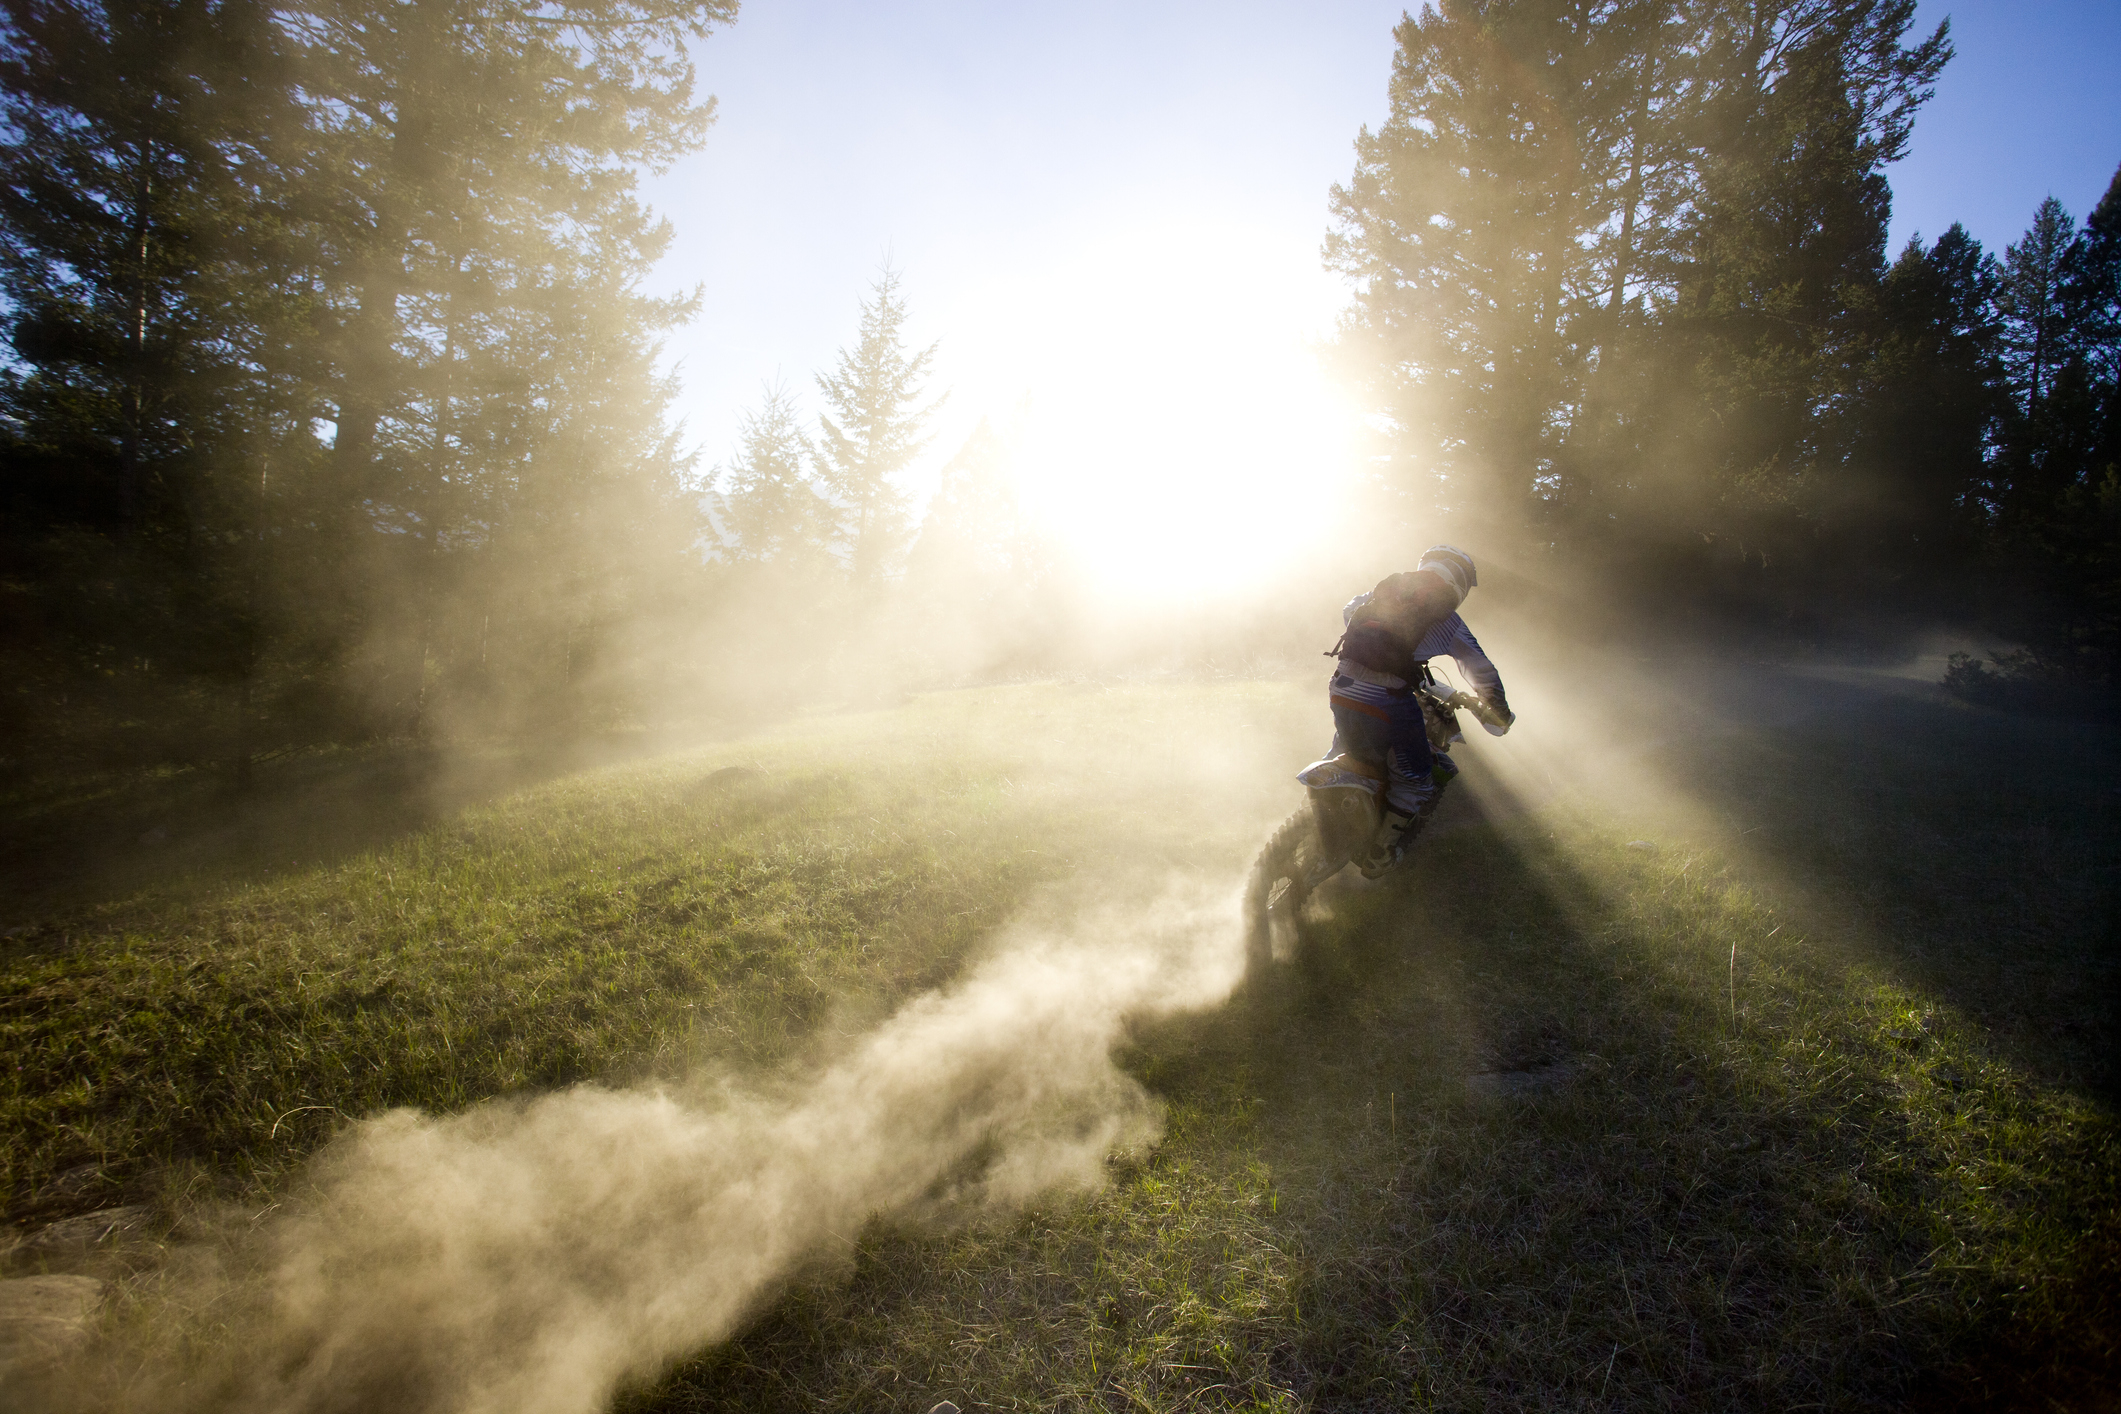 Person riding a dirt bike through a dusty trail with sunlight filtering through trees